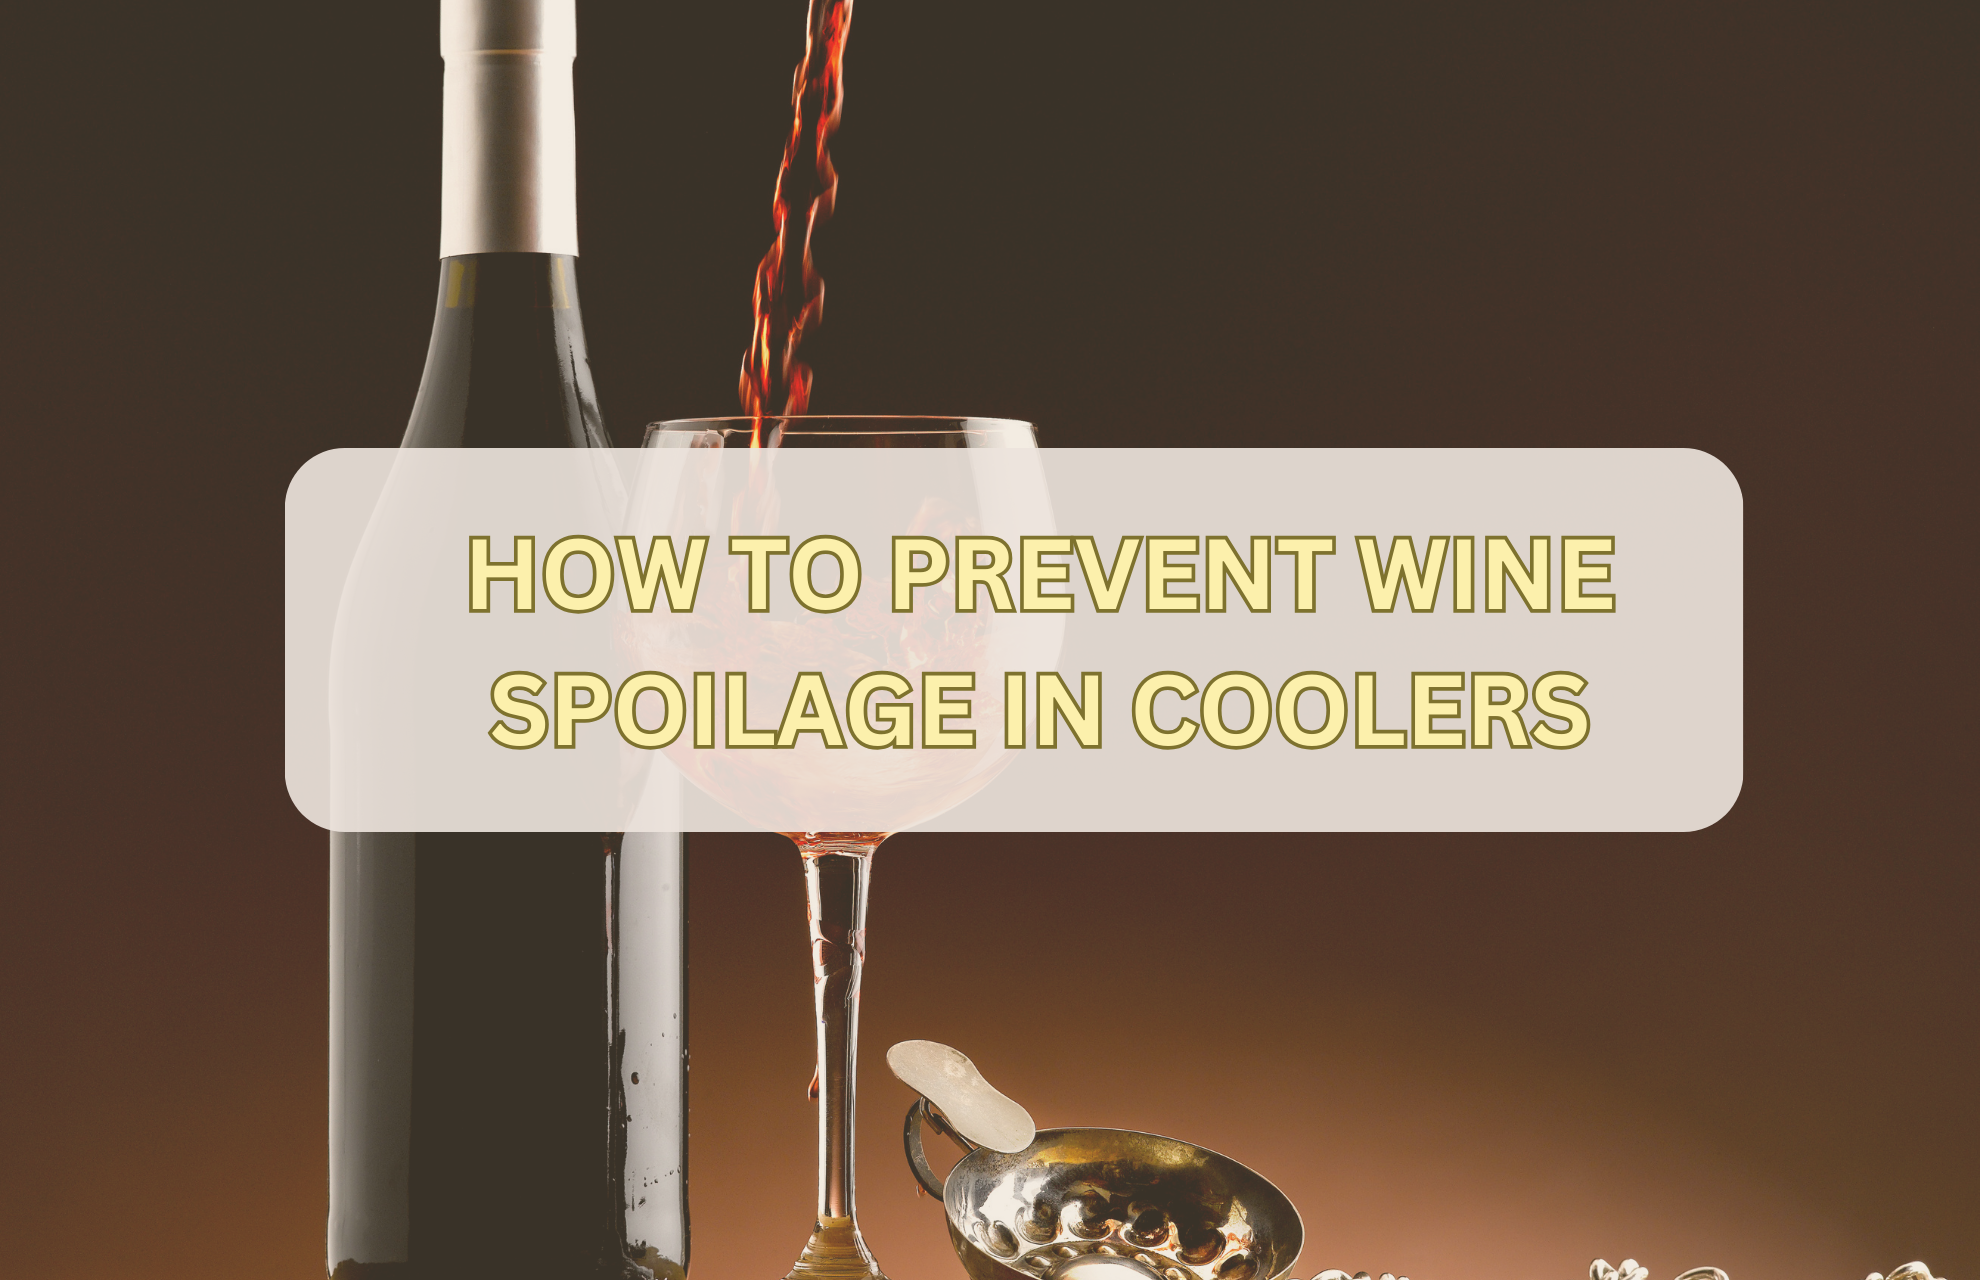 HOW TO PREVENT WINE SPOILAGE IN COOLERS